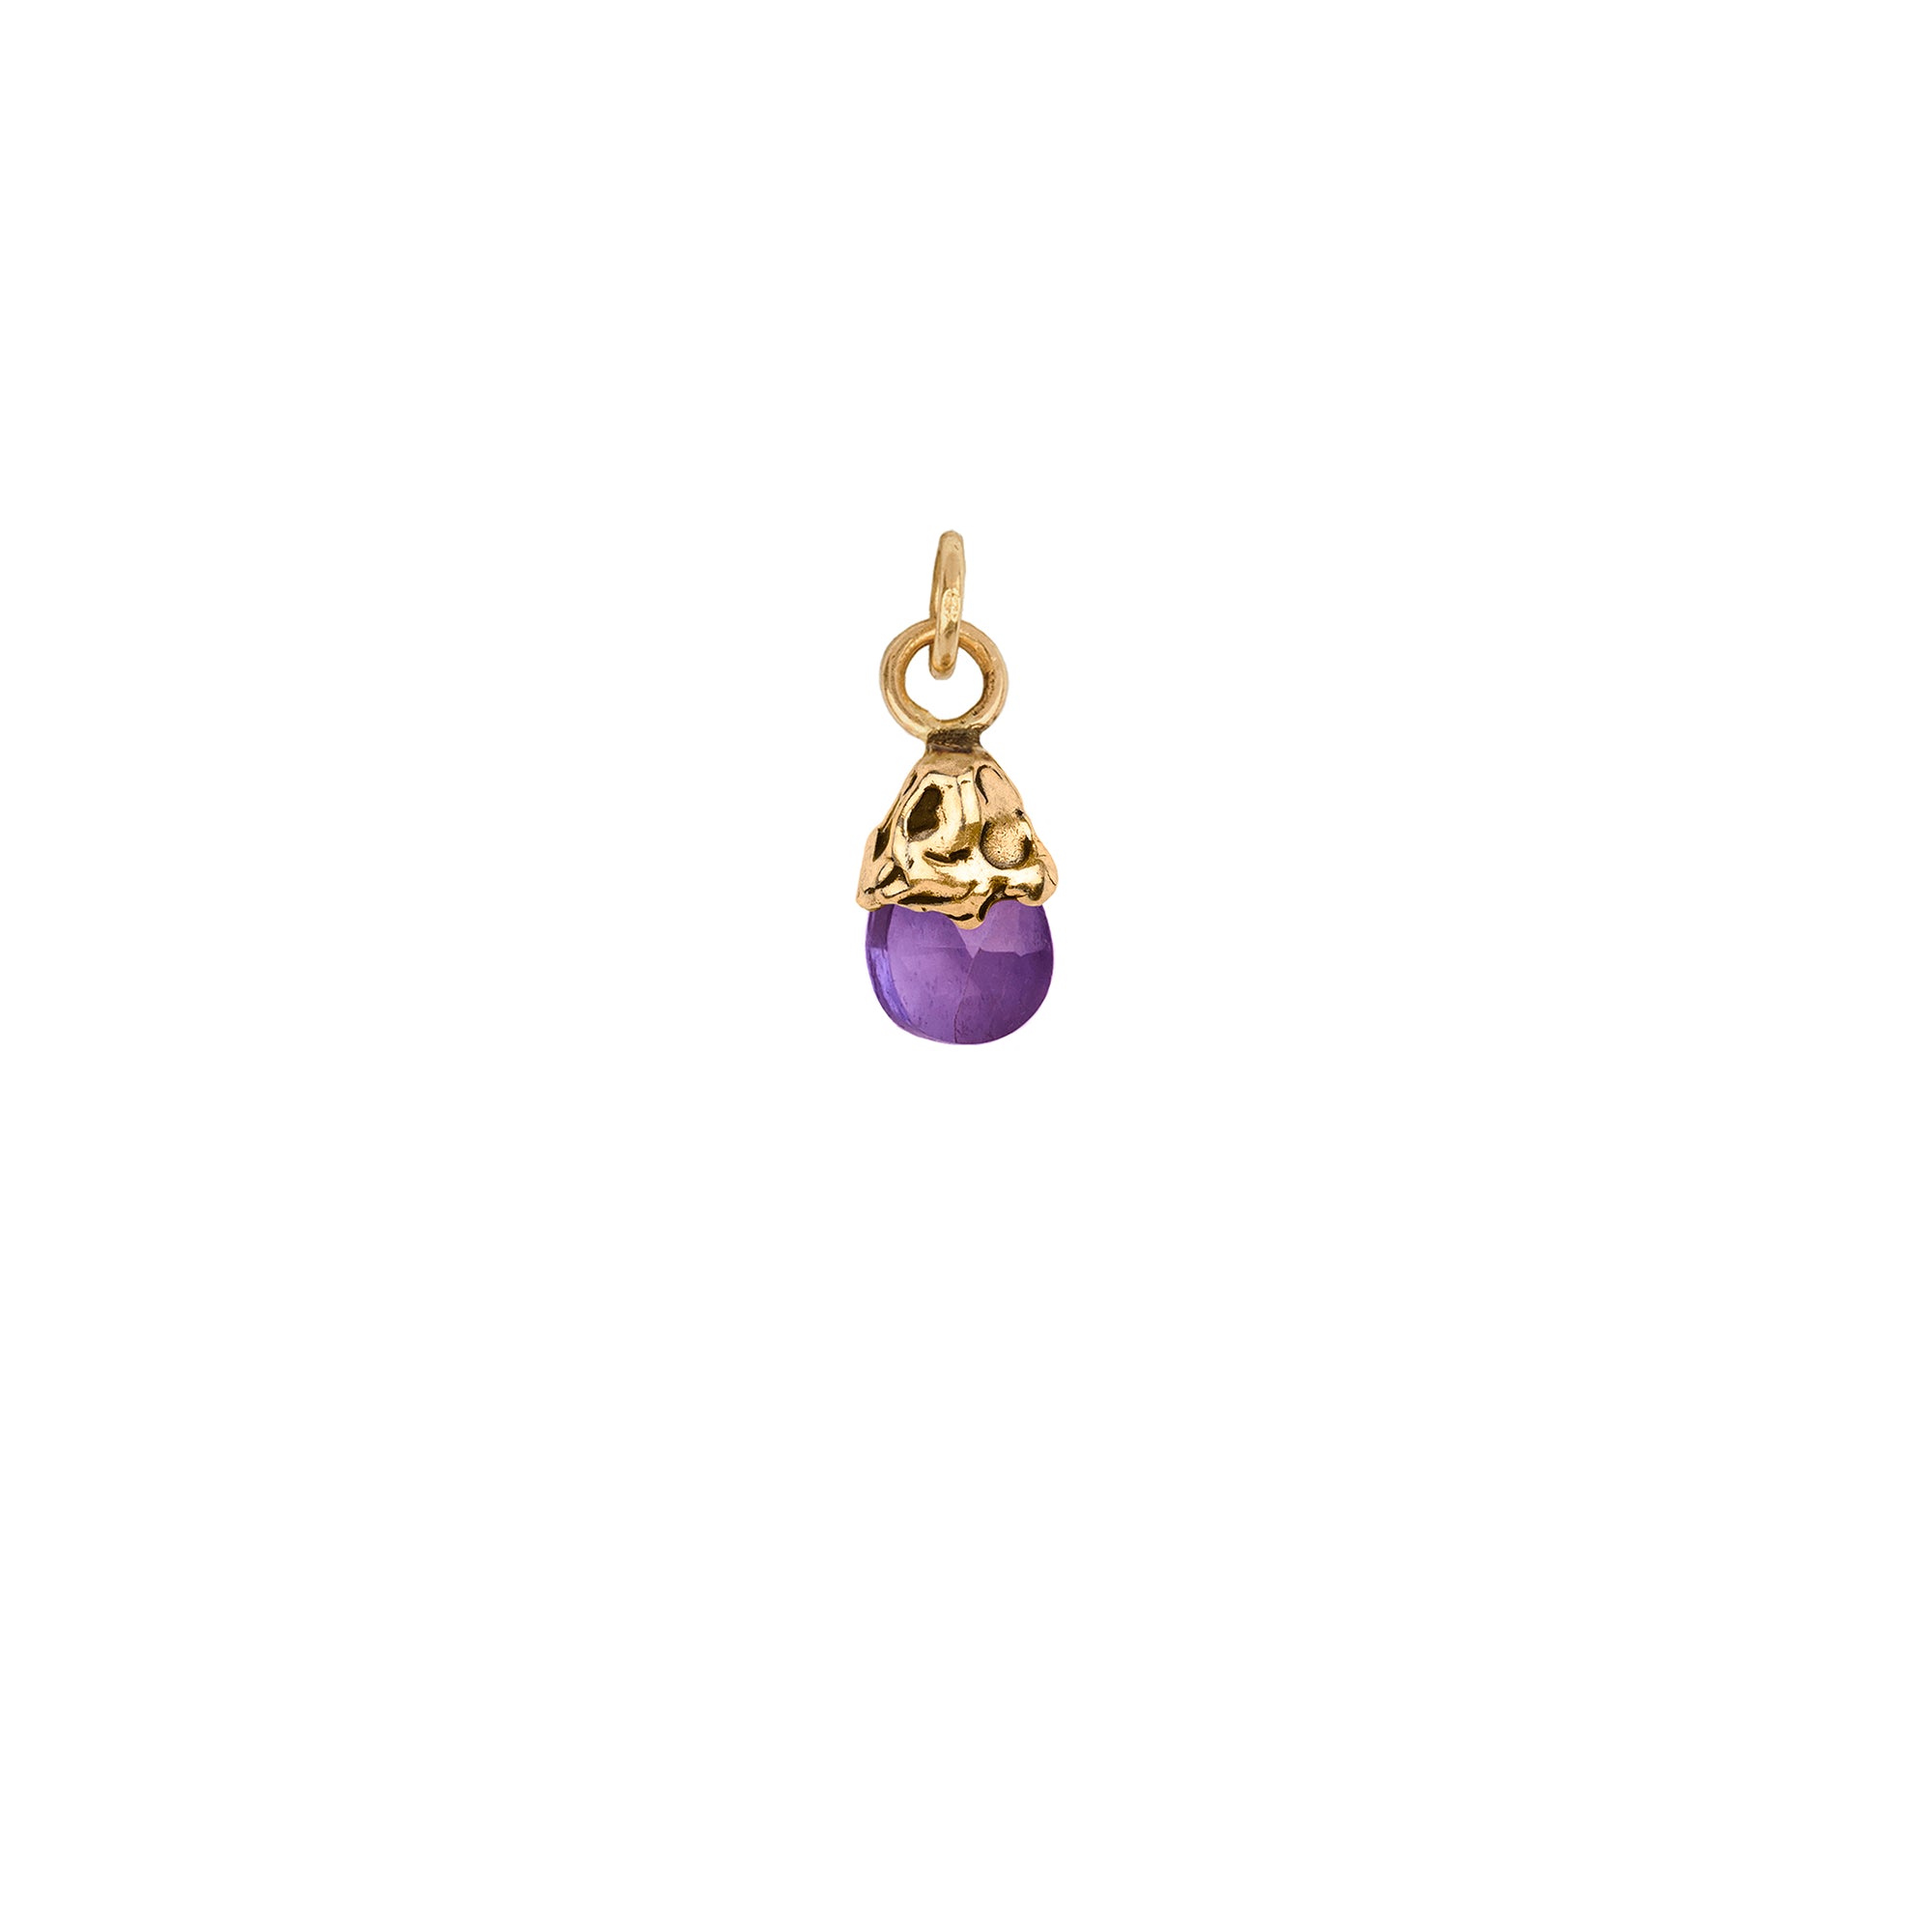 Balance 14K Gold Capped Attraction Charm